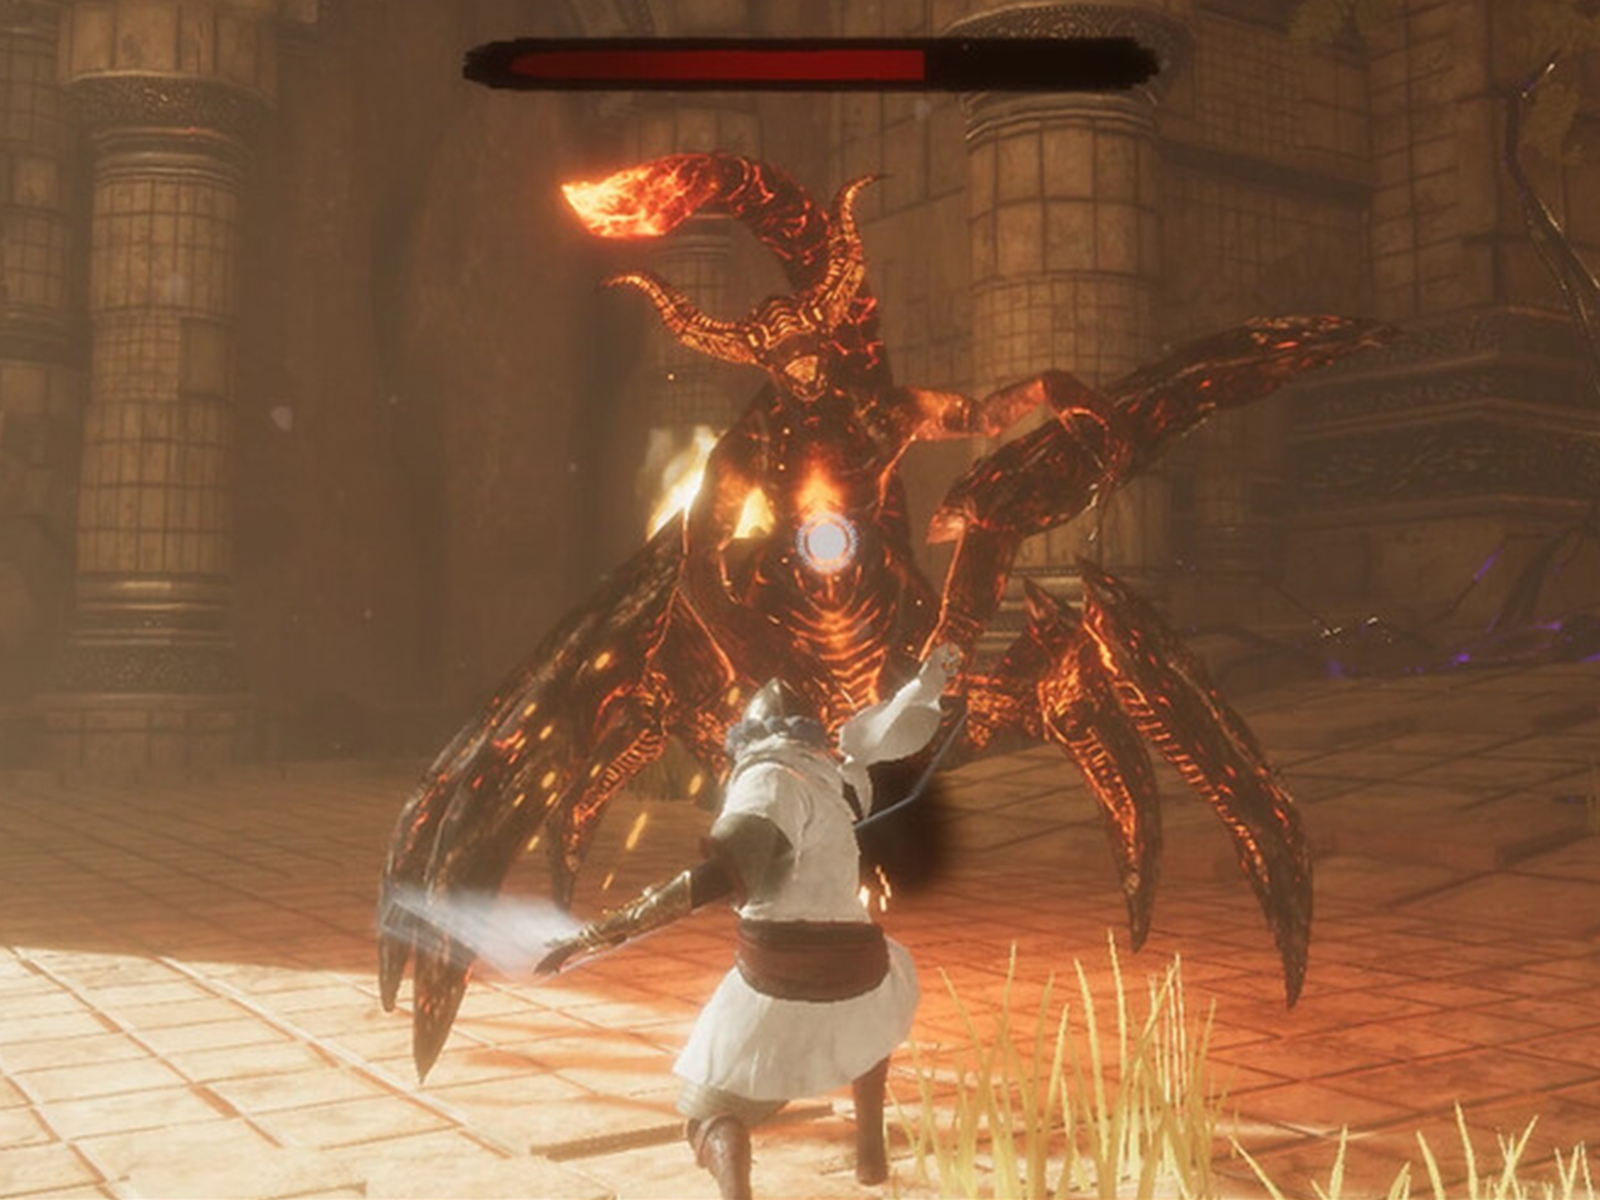 A screenshot from DigiPen student game Metamorphos depicting the hero confronting a large fiery scorpion boss in a stone temple. 